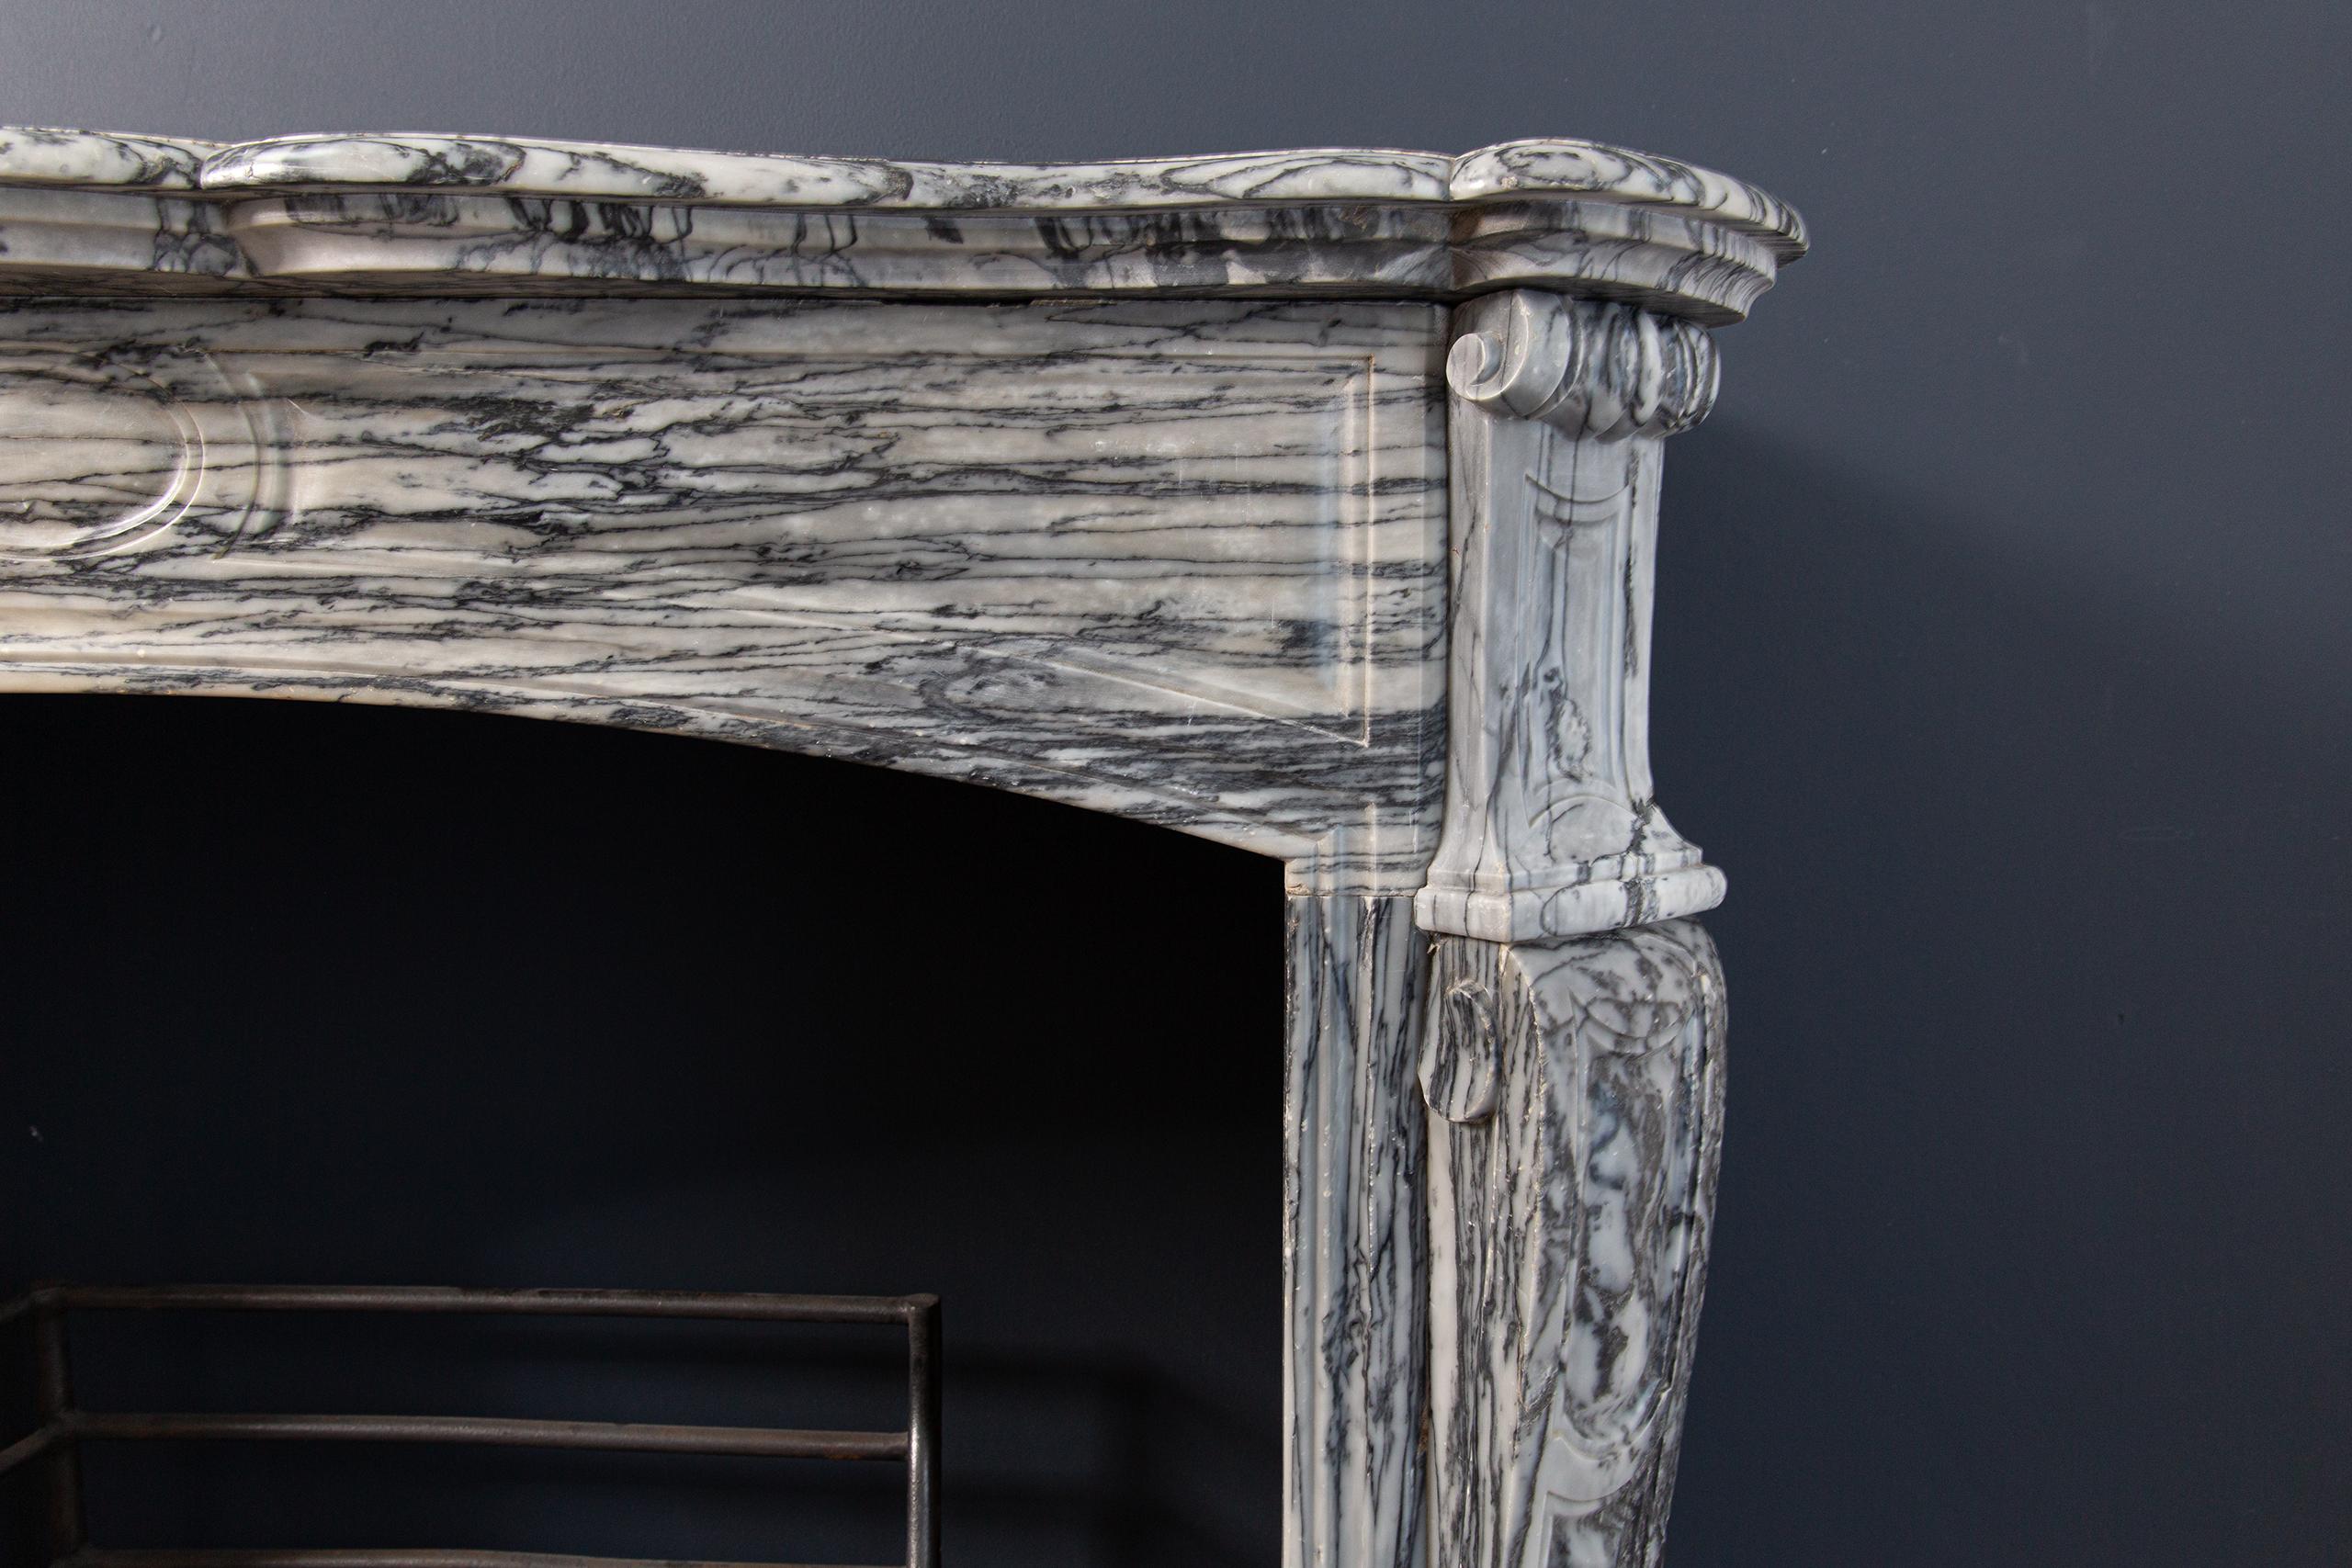 Gray antique front fireplace. The gray marble type where this fireplace is from buildings has a wild pattern. The veins in this type of stone provide a beautiful drawing. The fireplace has beautifully decorated consoles and a curved front. The top